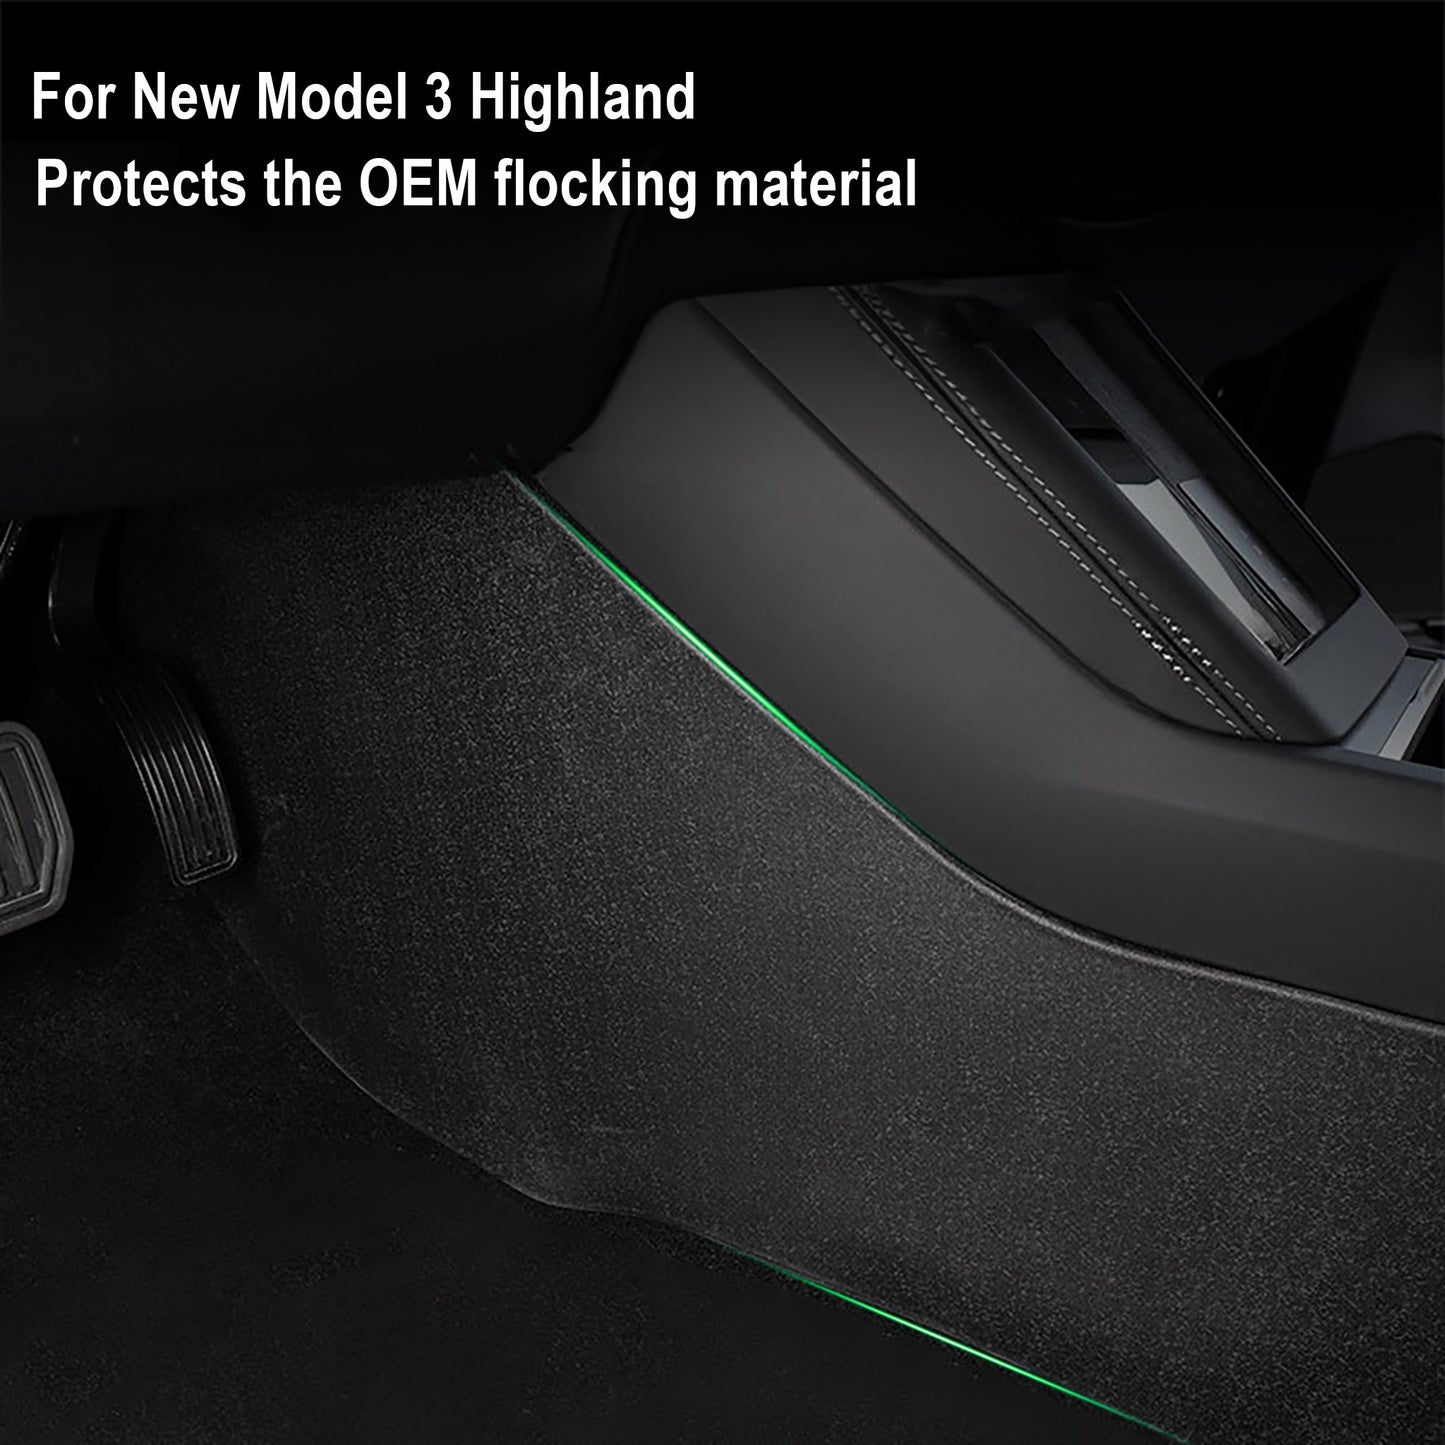 Center Console Side Cover Protector for Tesla New Model 3 Highland